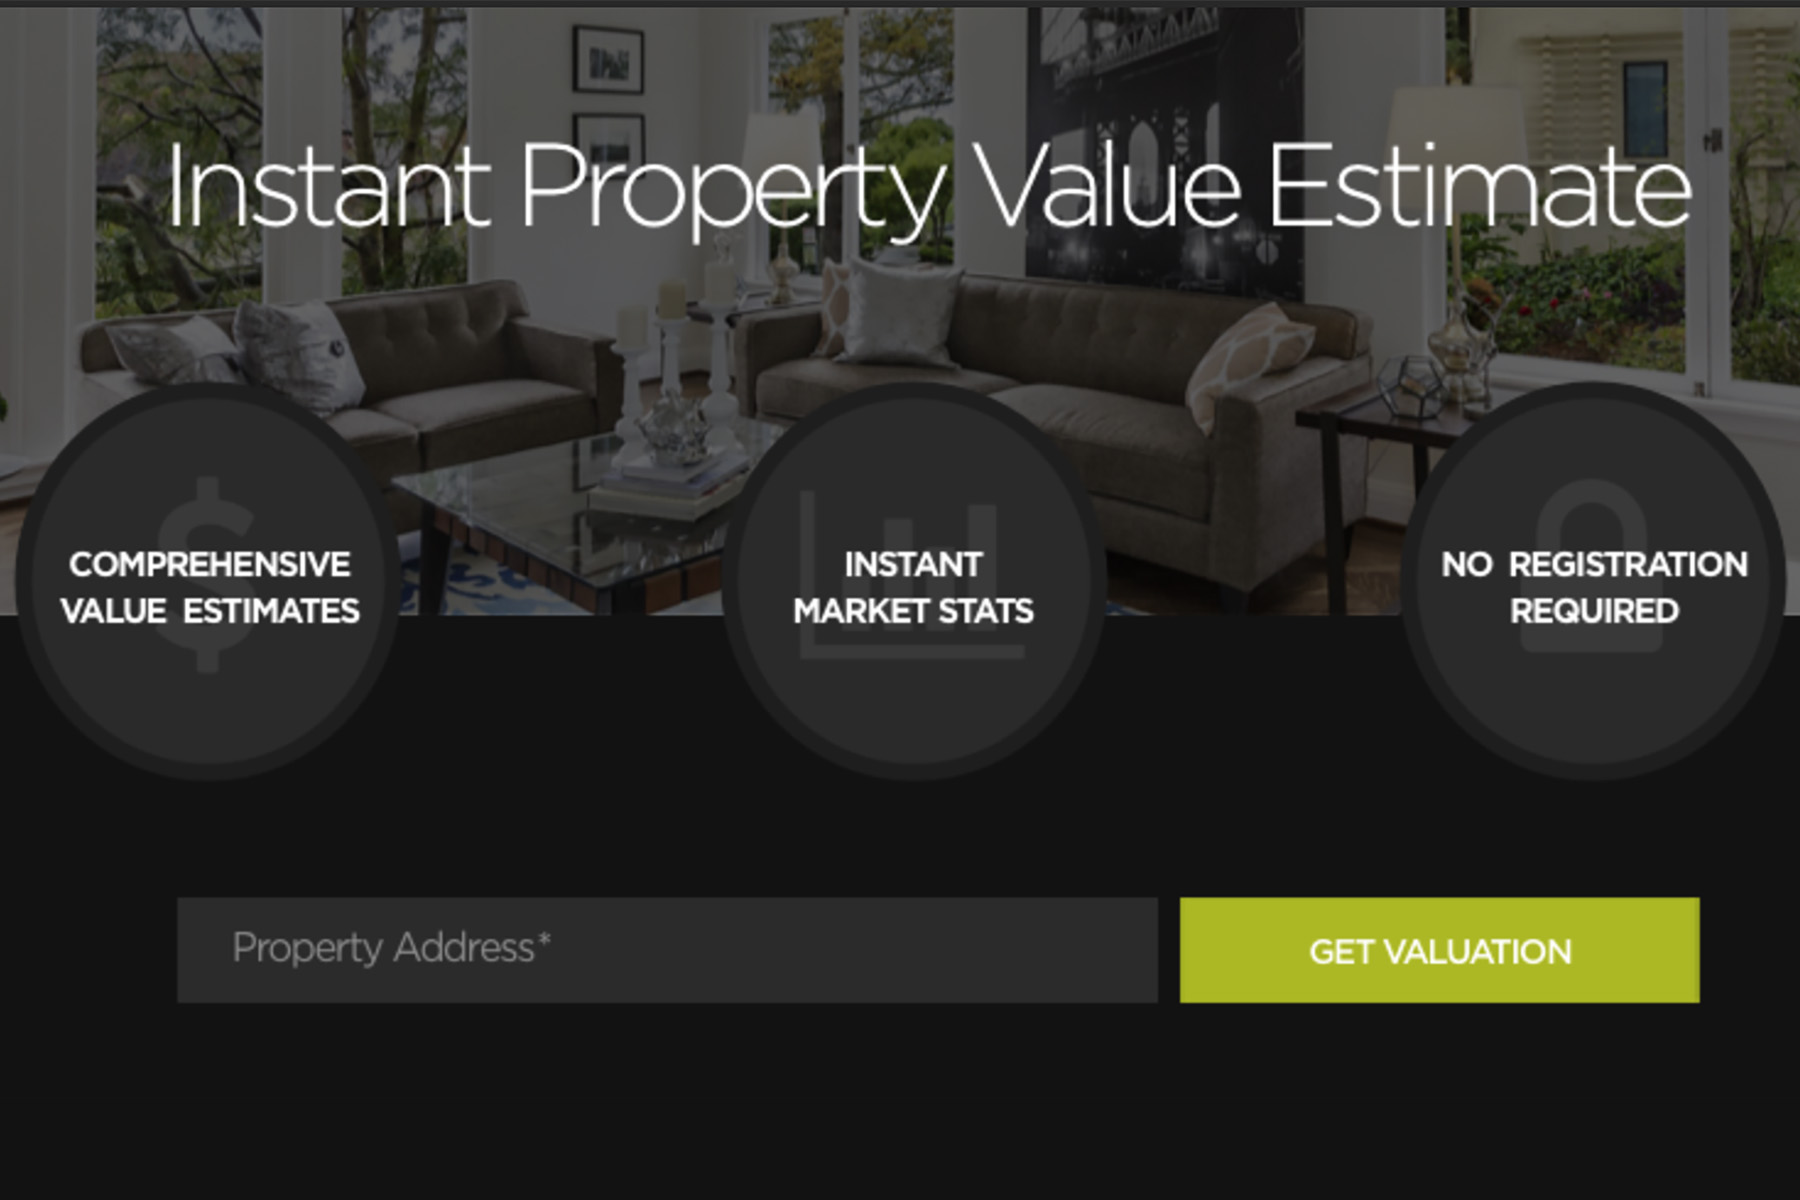 Zephyr Real Estate Provides Exclusive New Property Valuation Tool